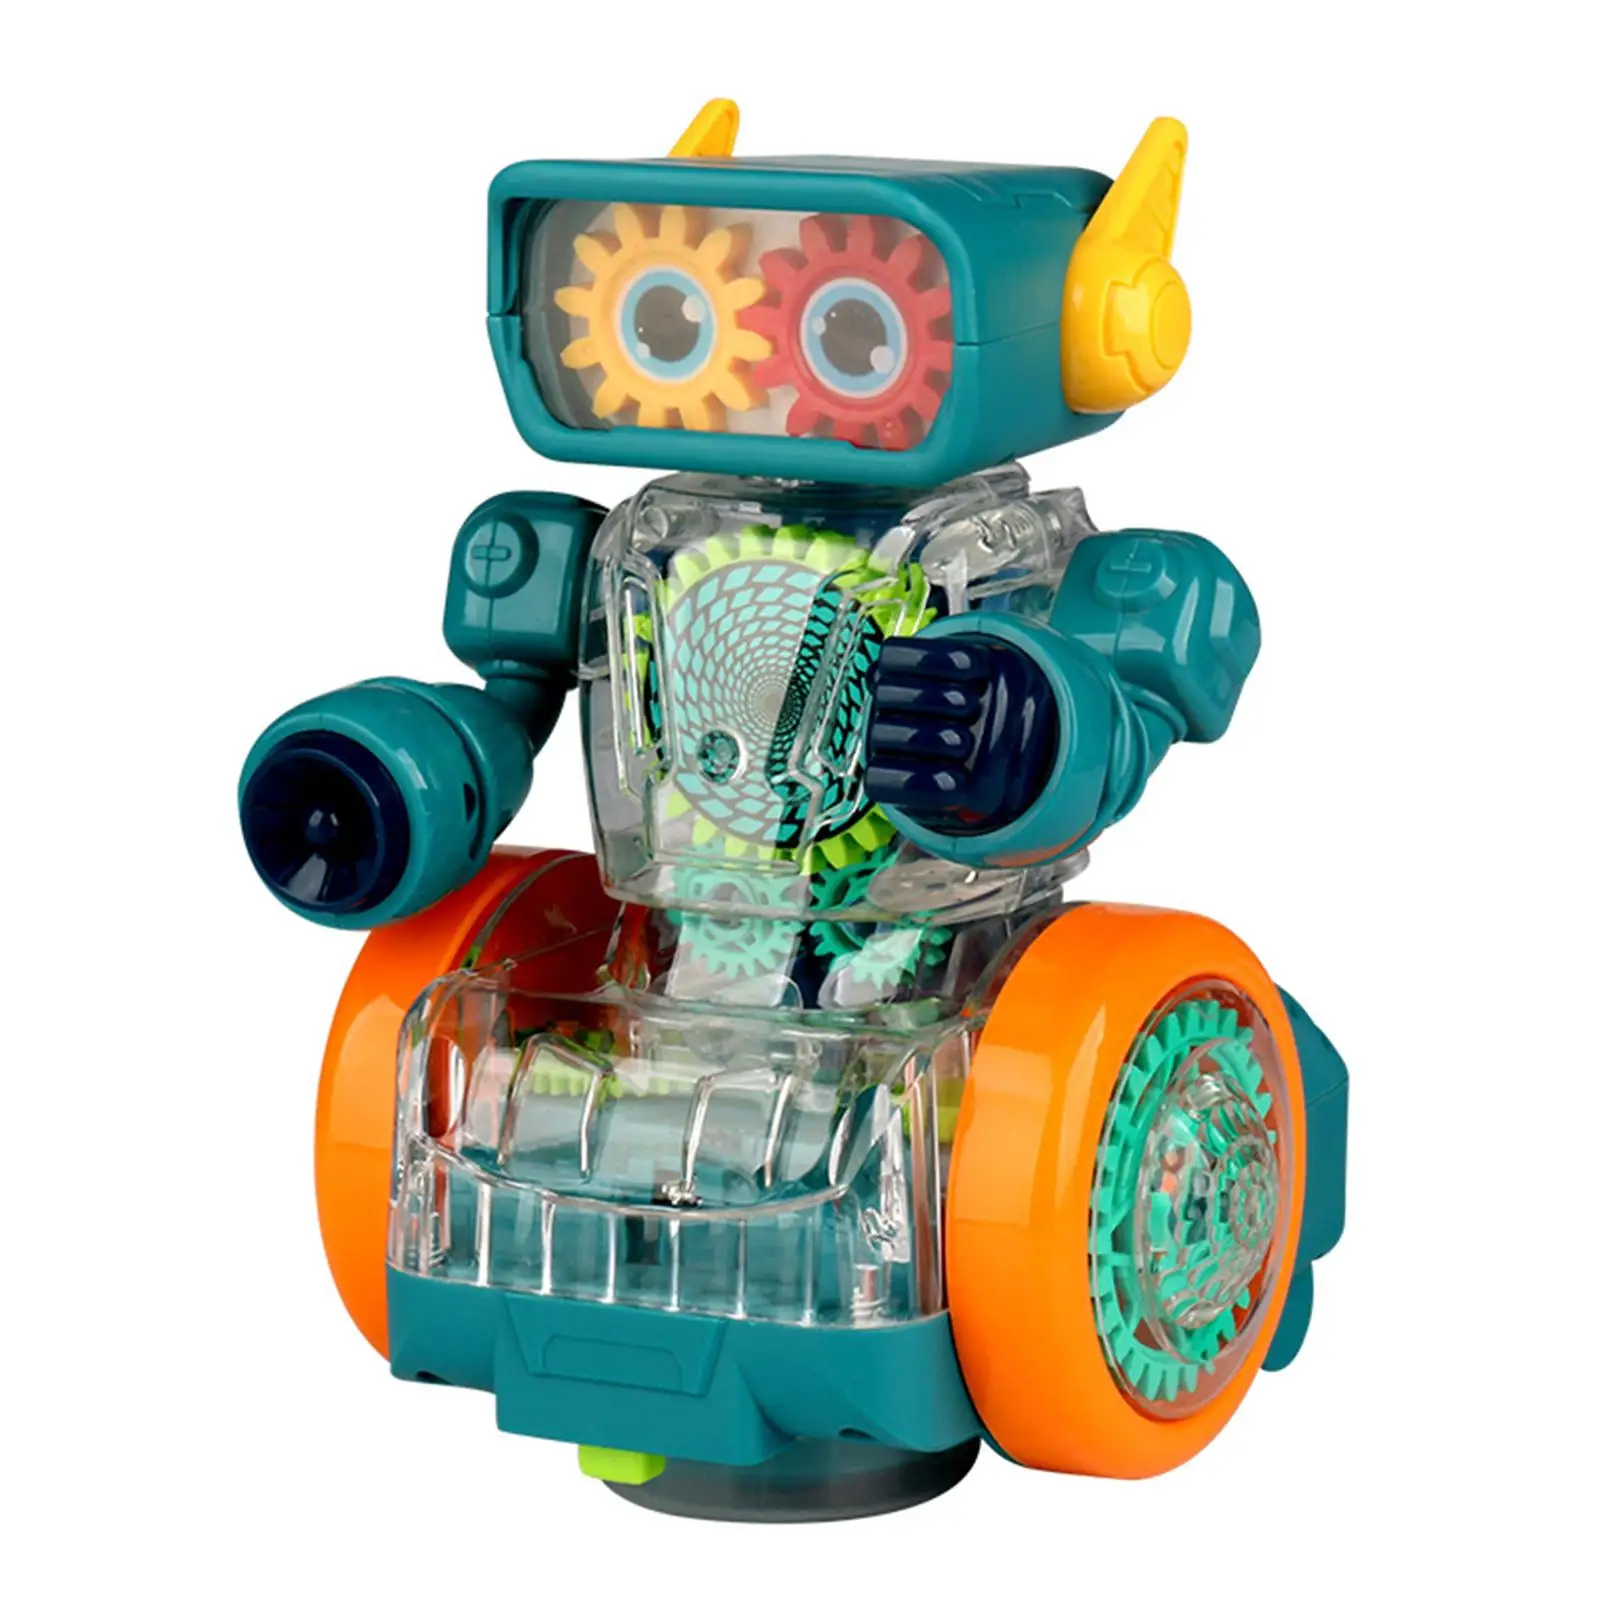 Mechanical Gear Robot Toy Developmental Toys with Lights for Birthday Gifts